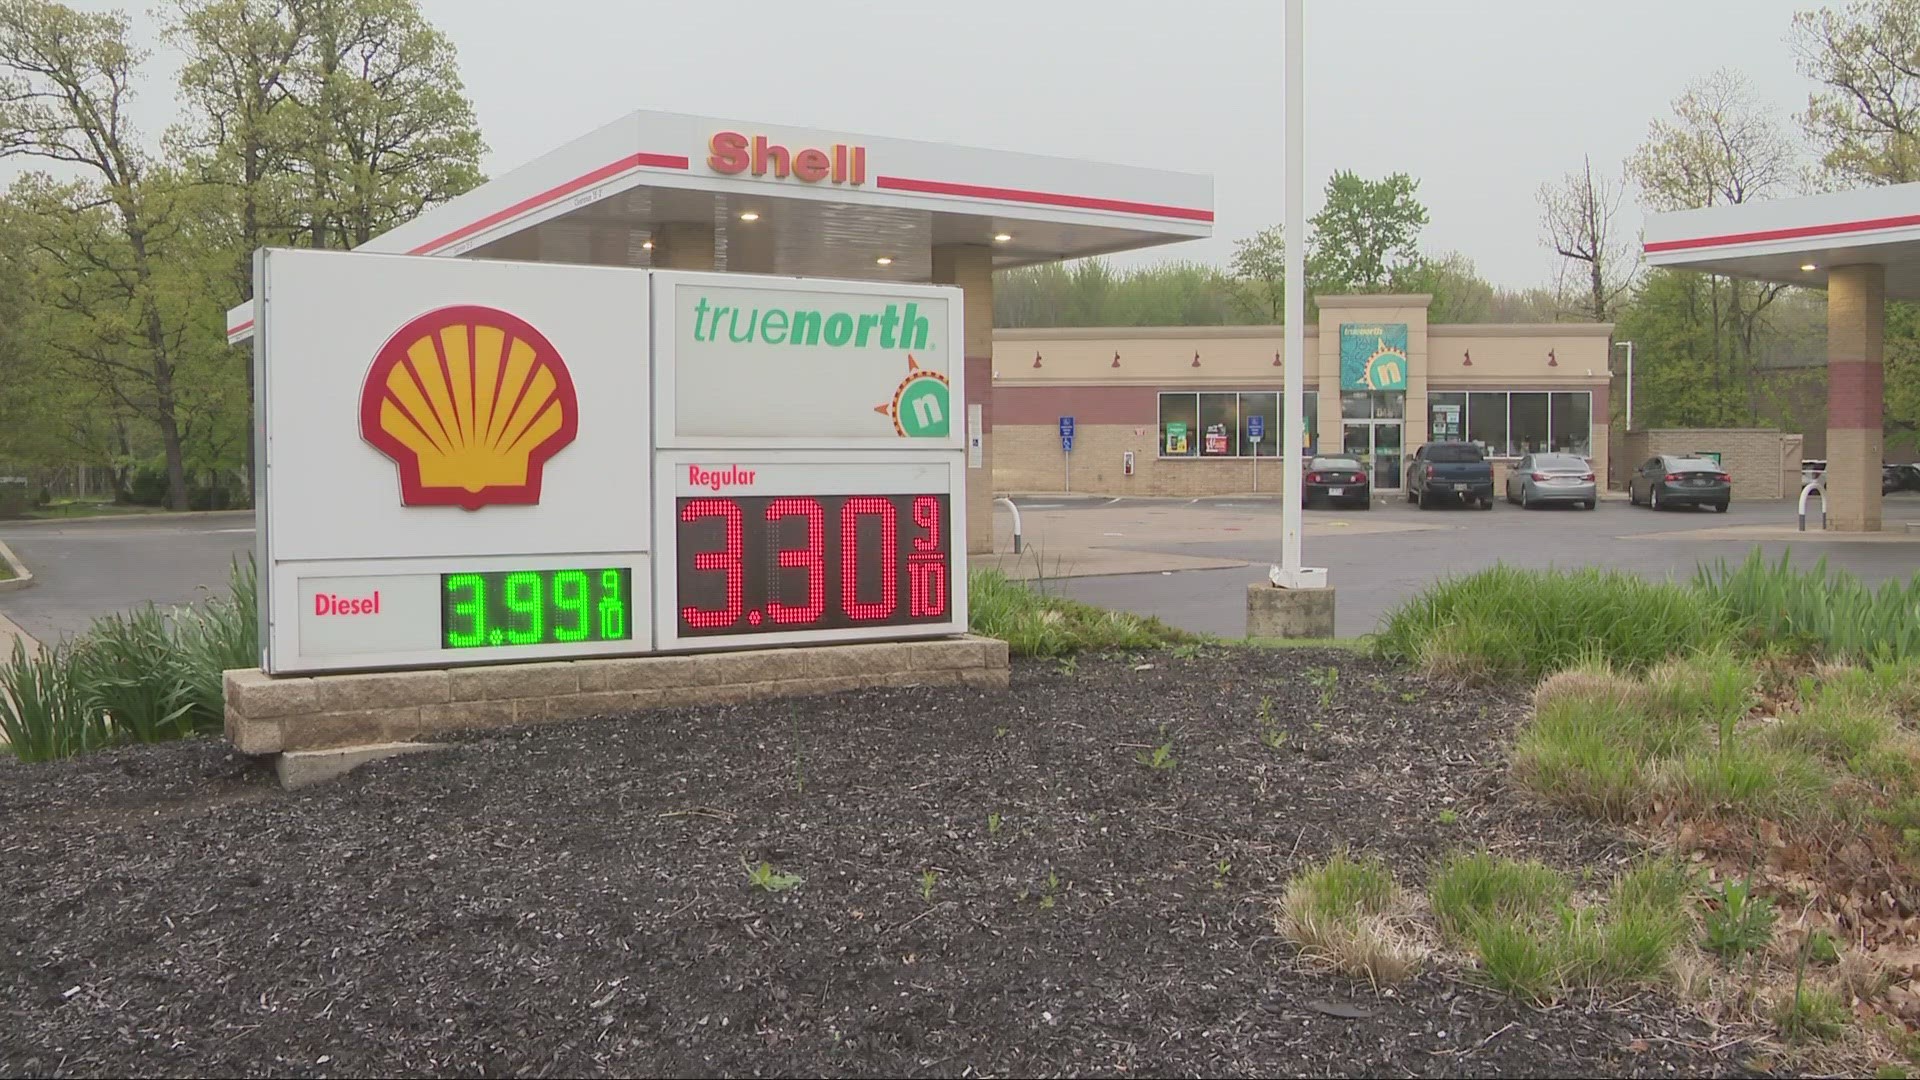 This time last year, Cleveland's average price was listed at $4.47 per gallon.